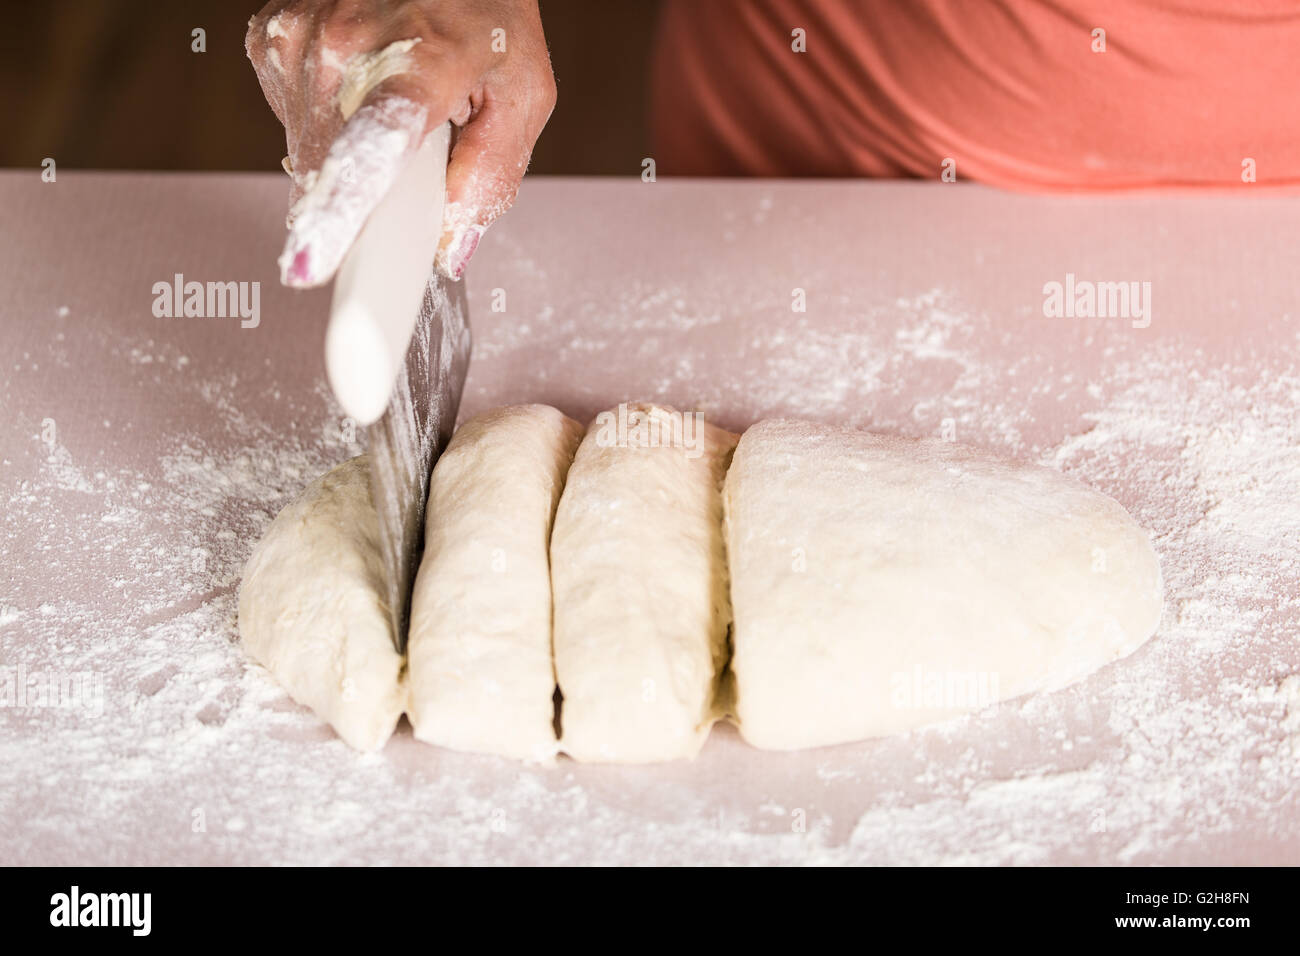 Woman using a dough cutter to divide the naan bread dough into six equal portions which are flattened and baked.  Bakers and pas Stock Photo